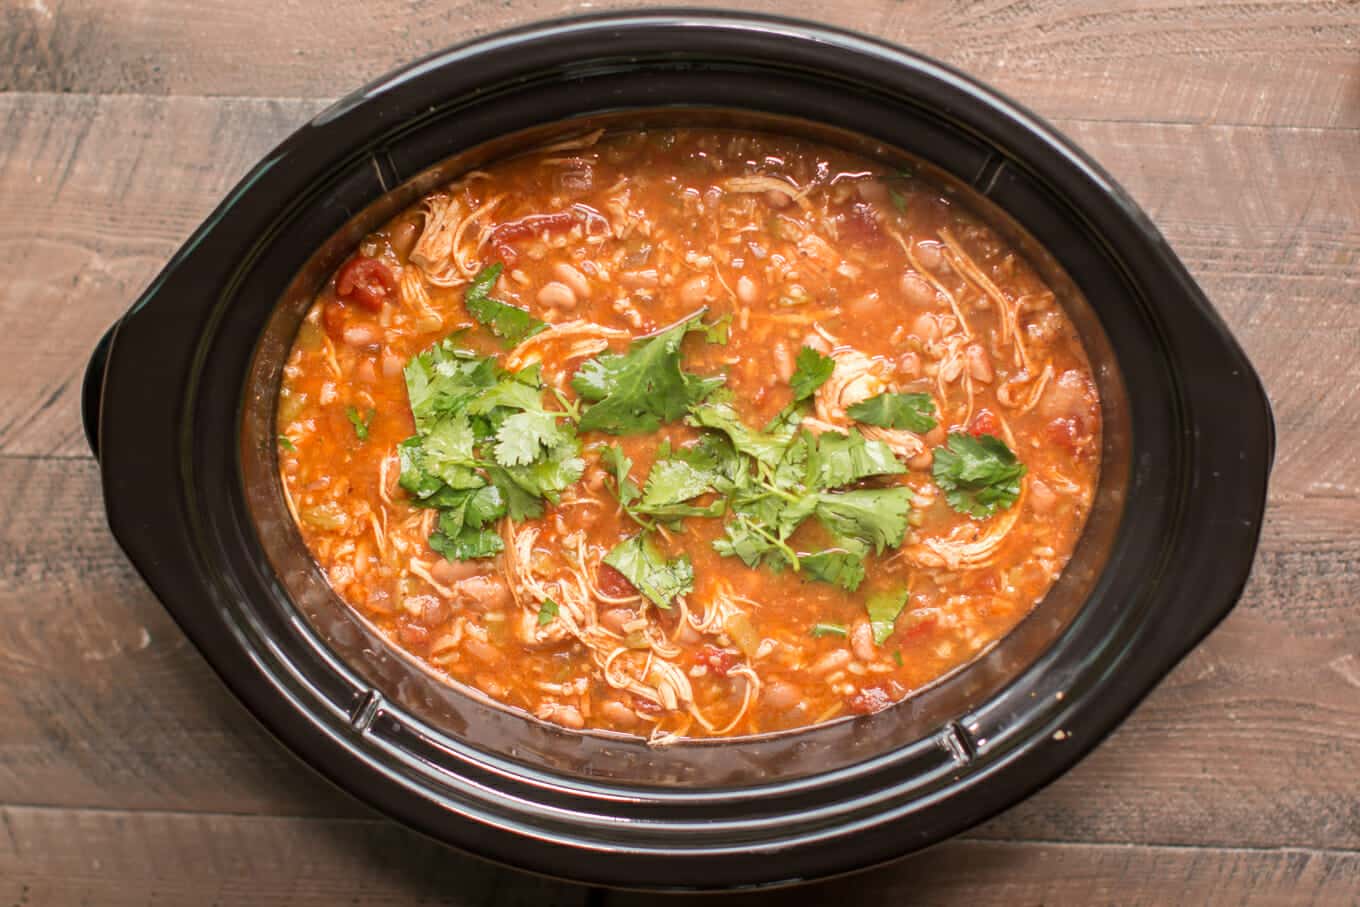 tomato based chicken soup garnished with cilantro in a slow cooker